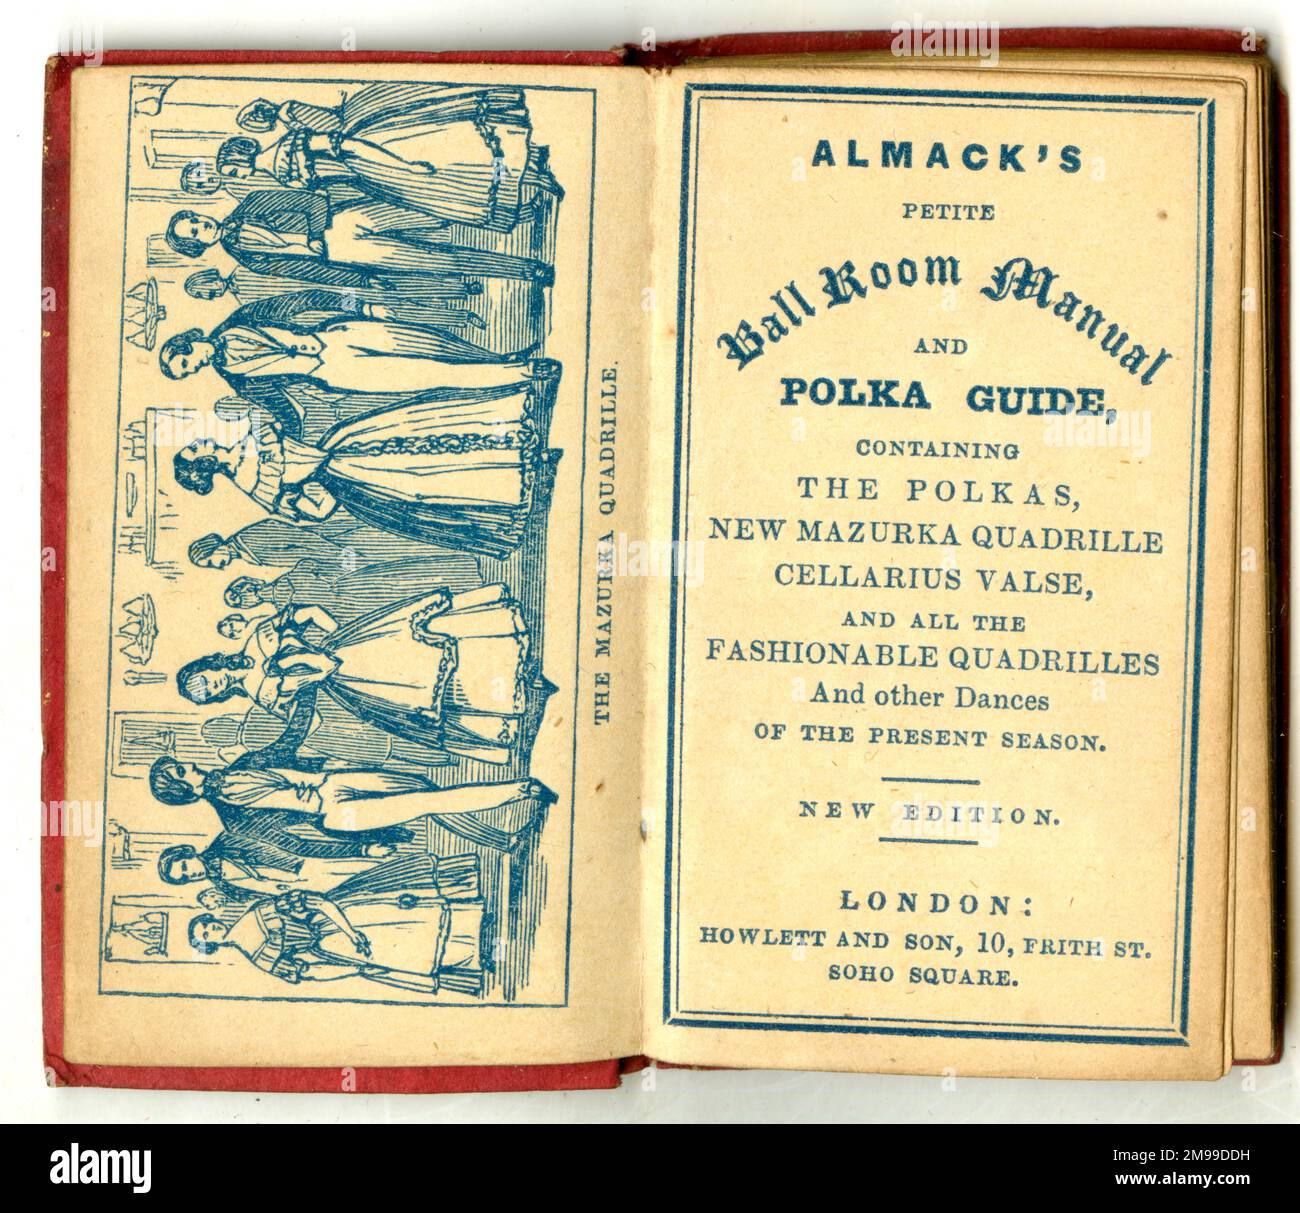 Almack's Petite Ball-Room Manual and Polka Guide - Title Page and Frontispiece. Stock Photo